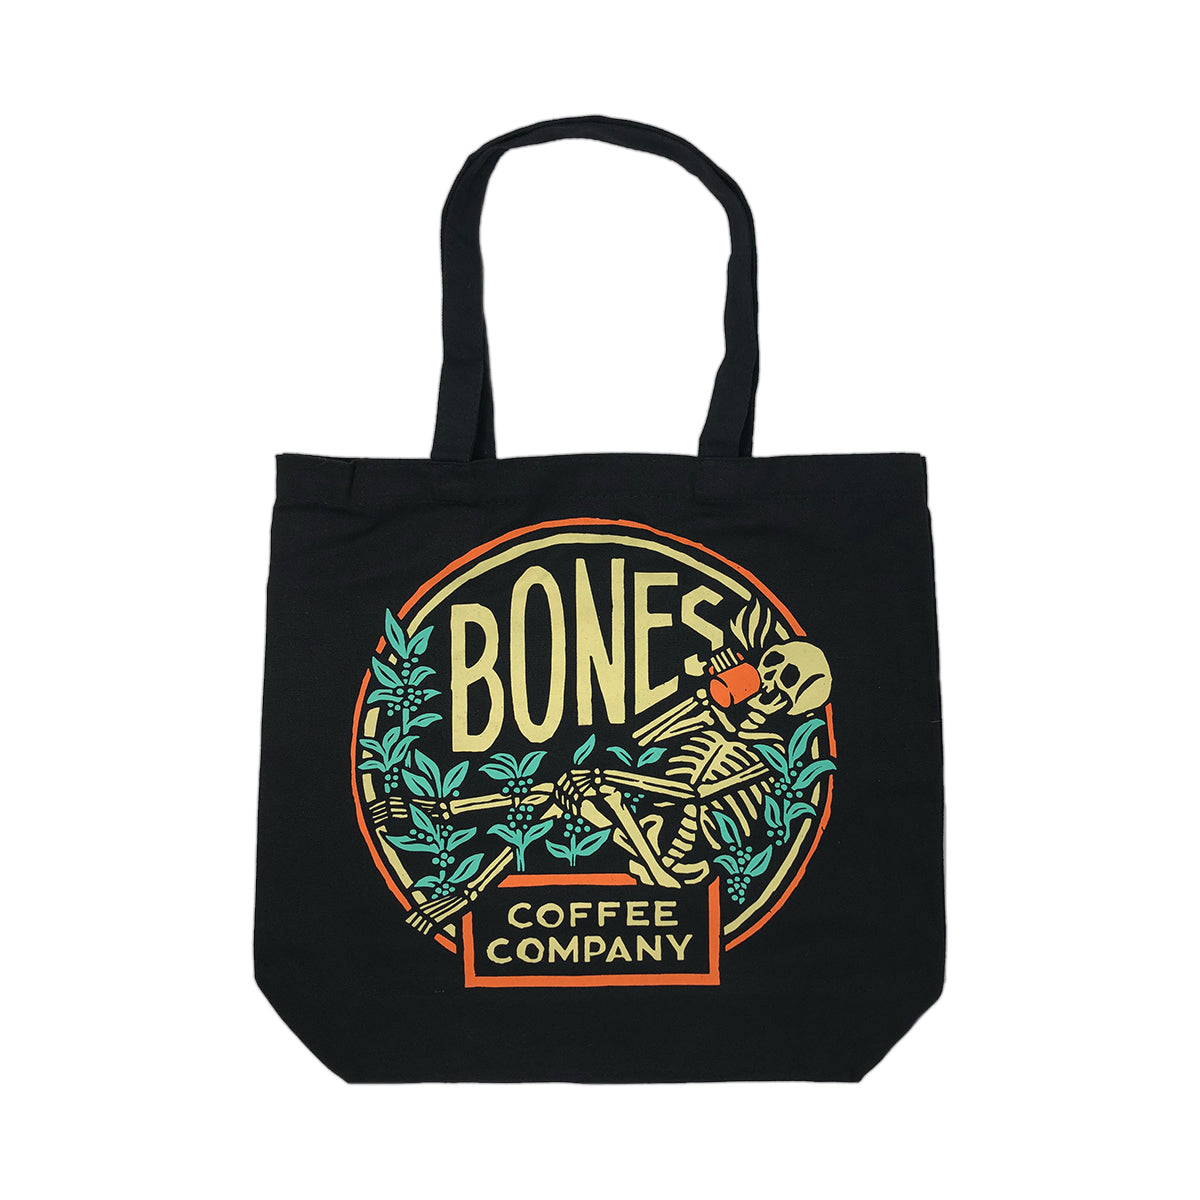 A black tote bag that has the classic Bones Coffee Company logo on it. The logo has a skeleton drinking coffee resting on greenery on it.